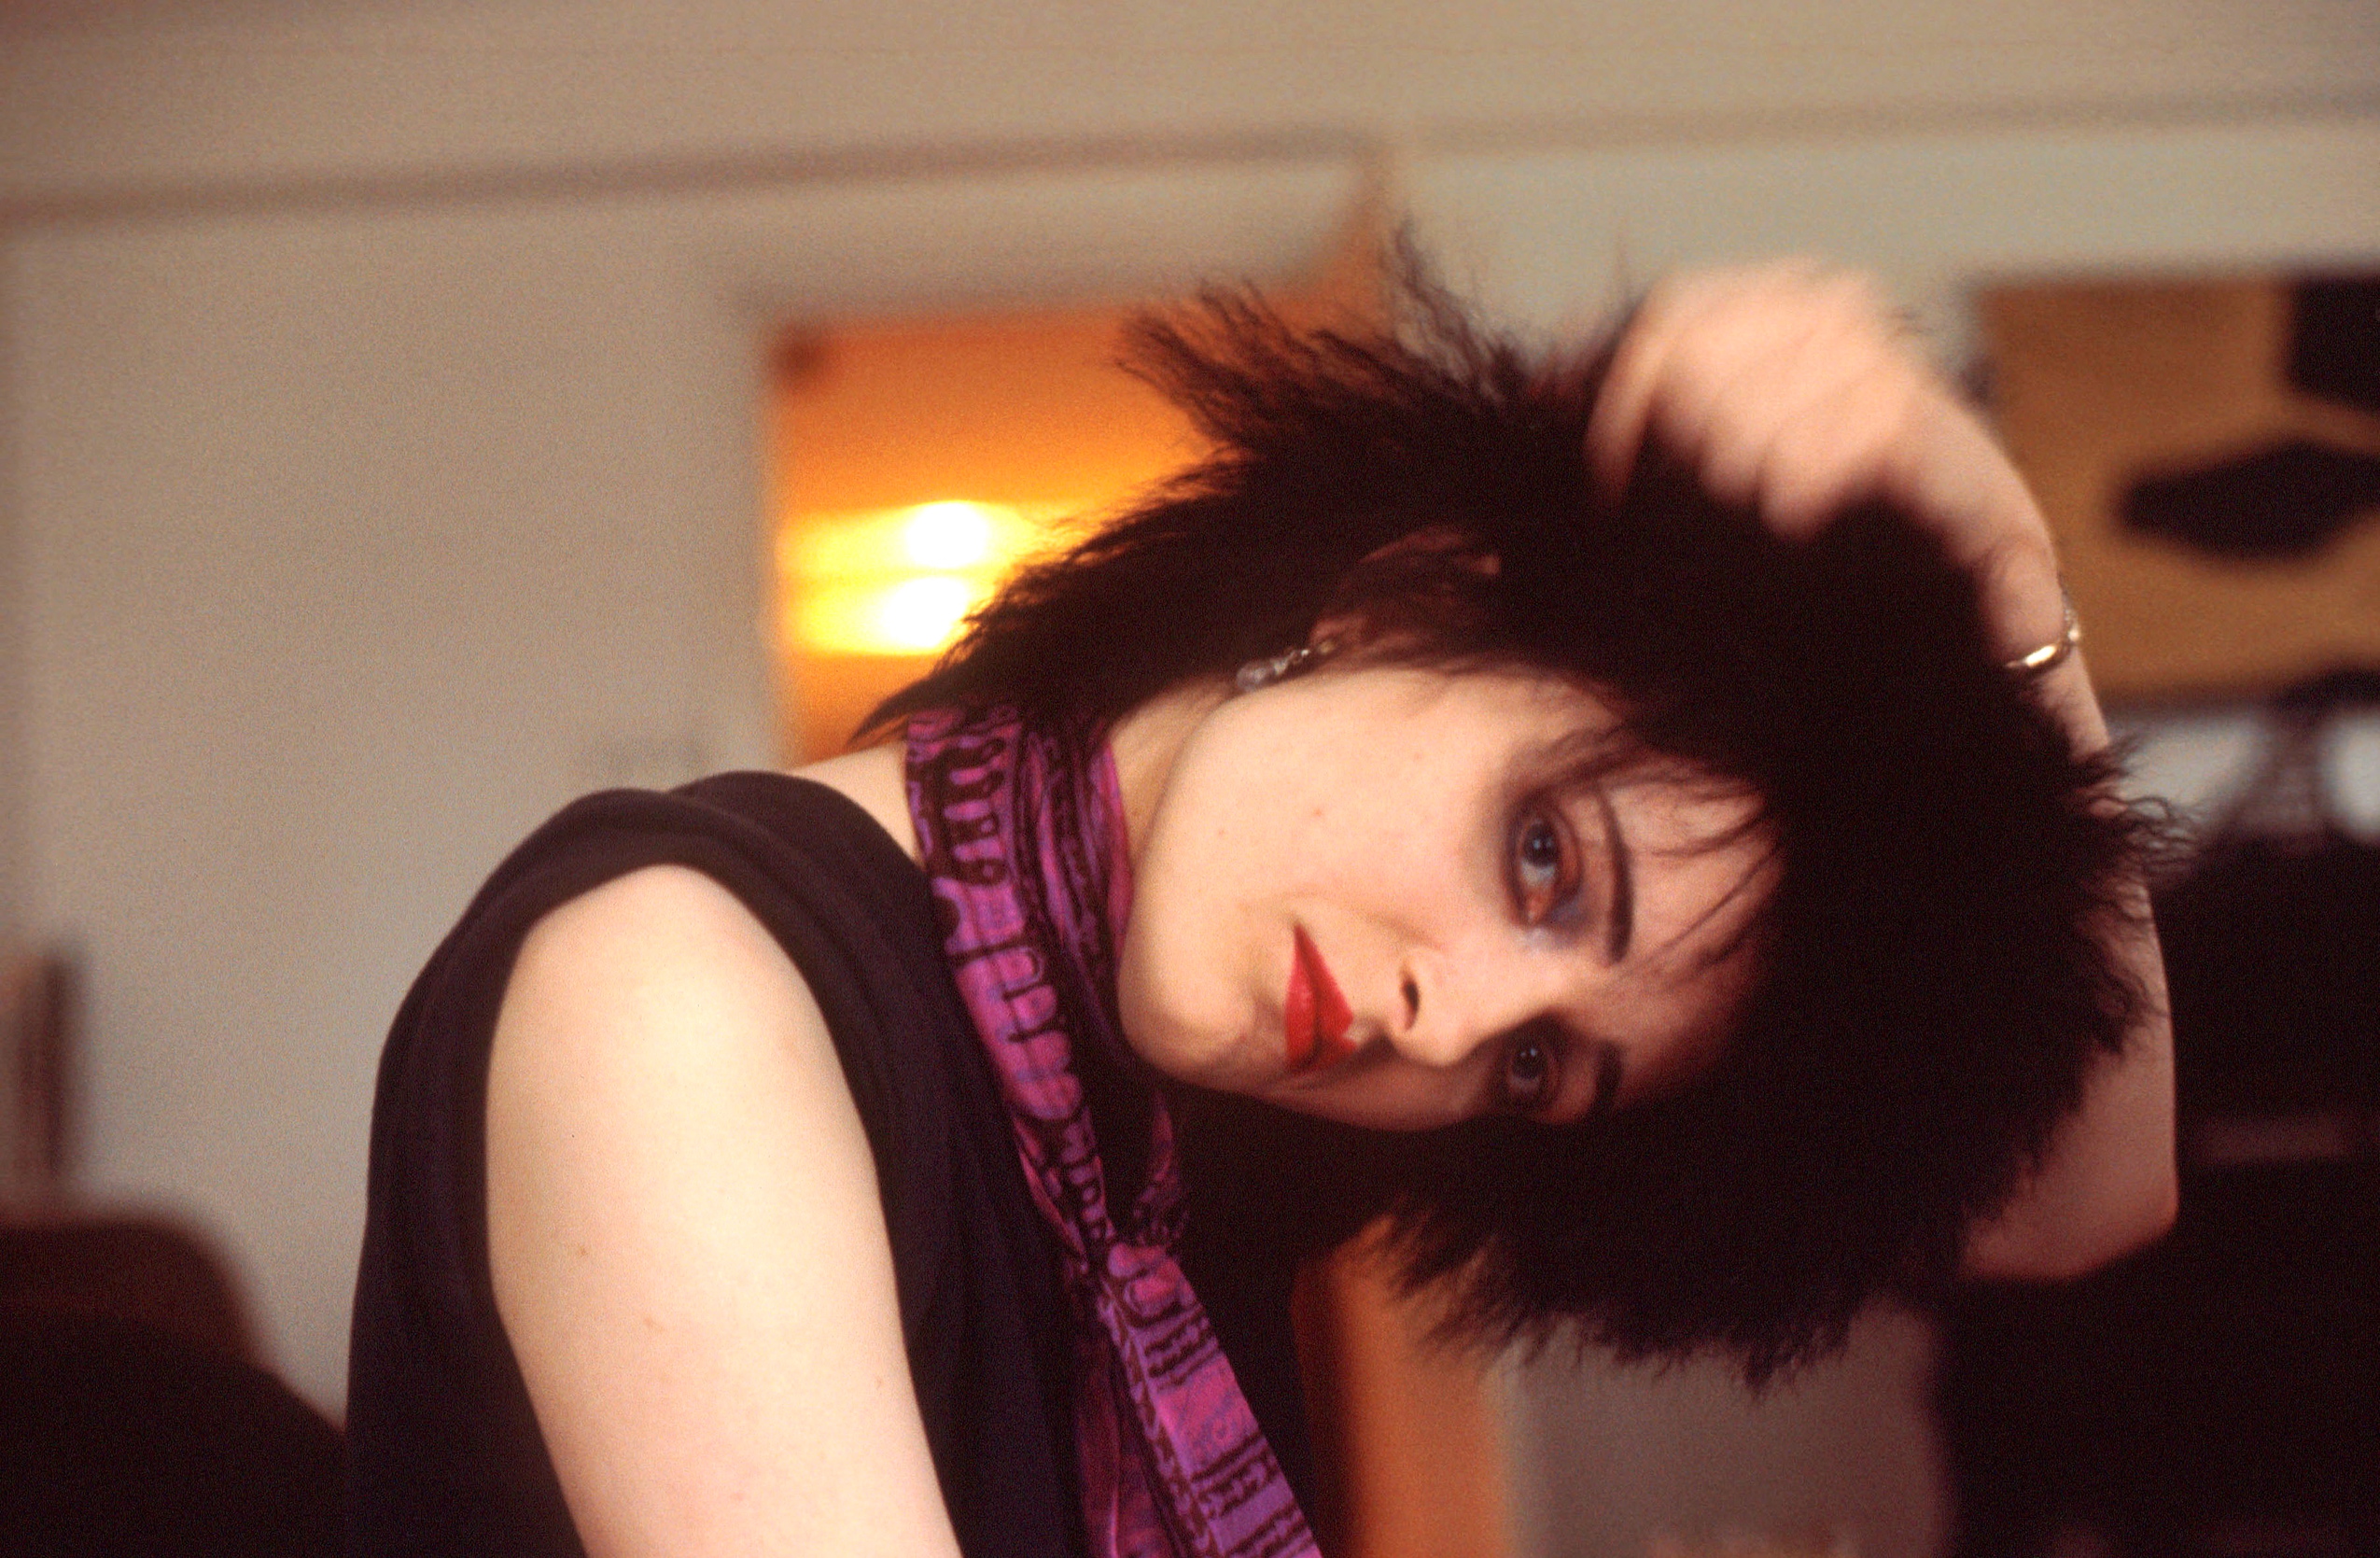 Cruel World Fest To Feature Siouxsie Sioux's First U.S. Show Since 2008